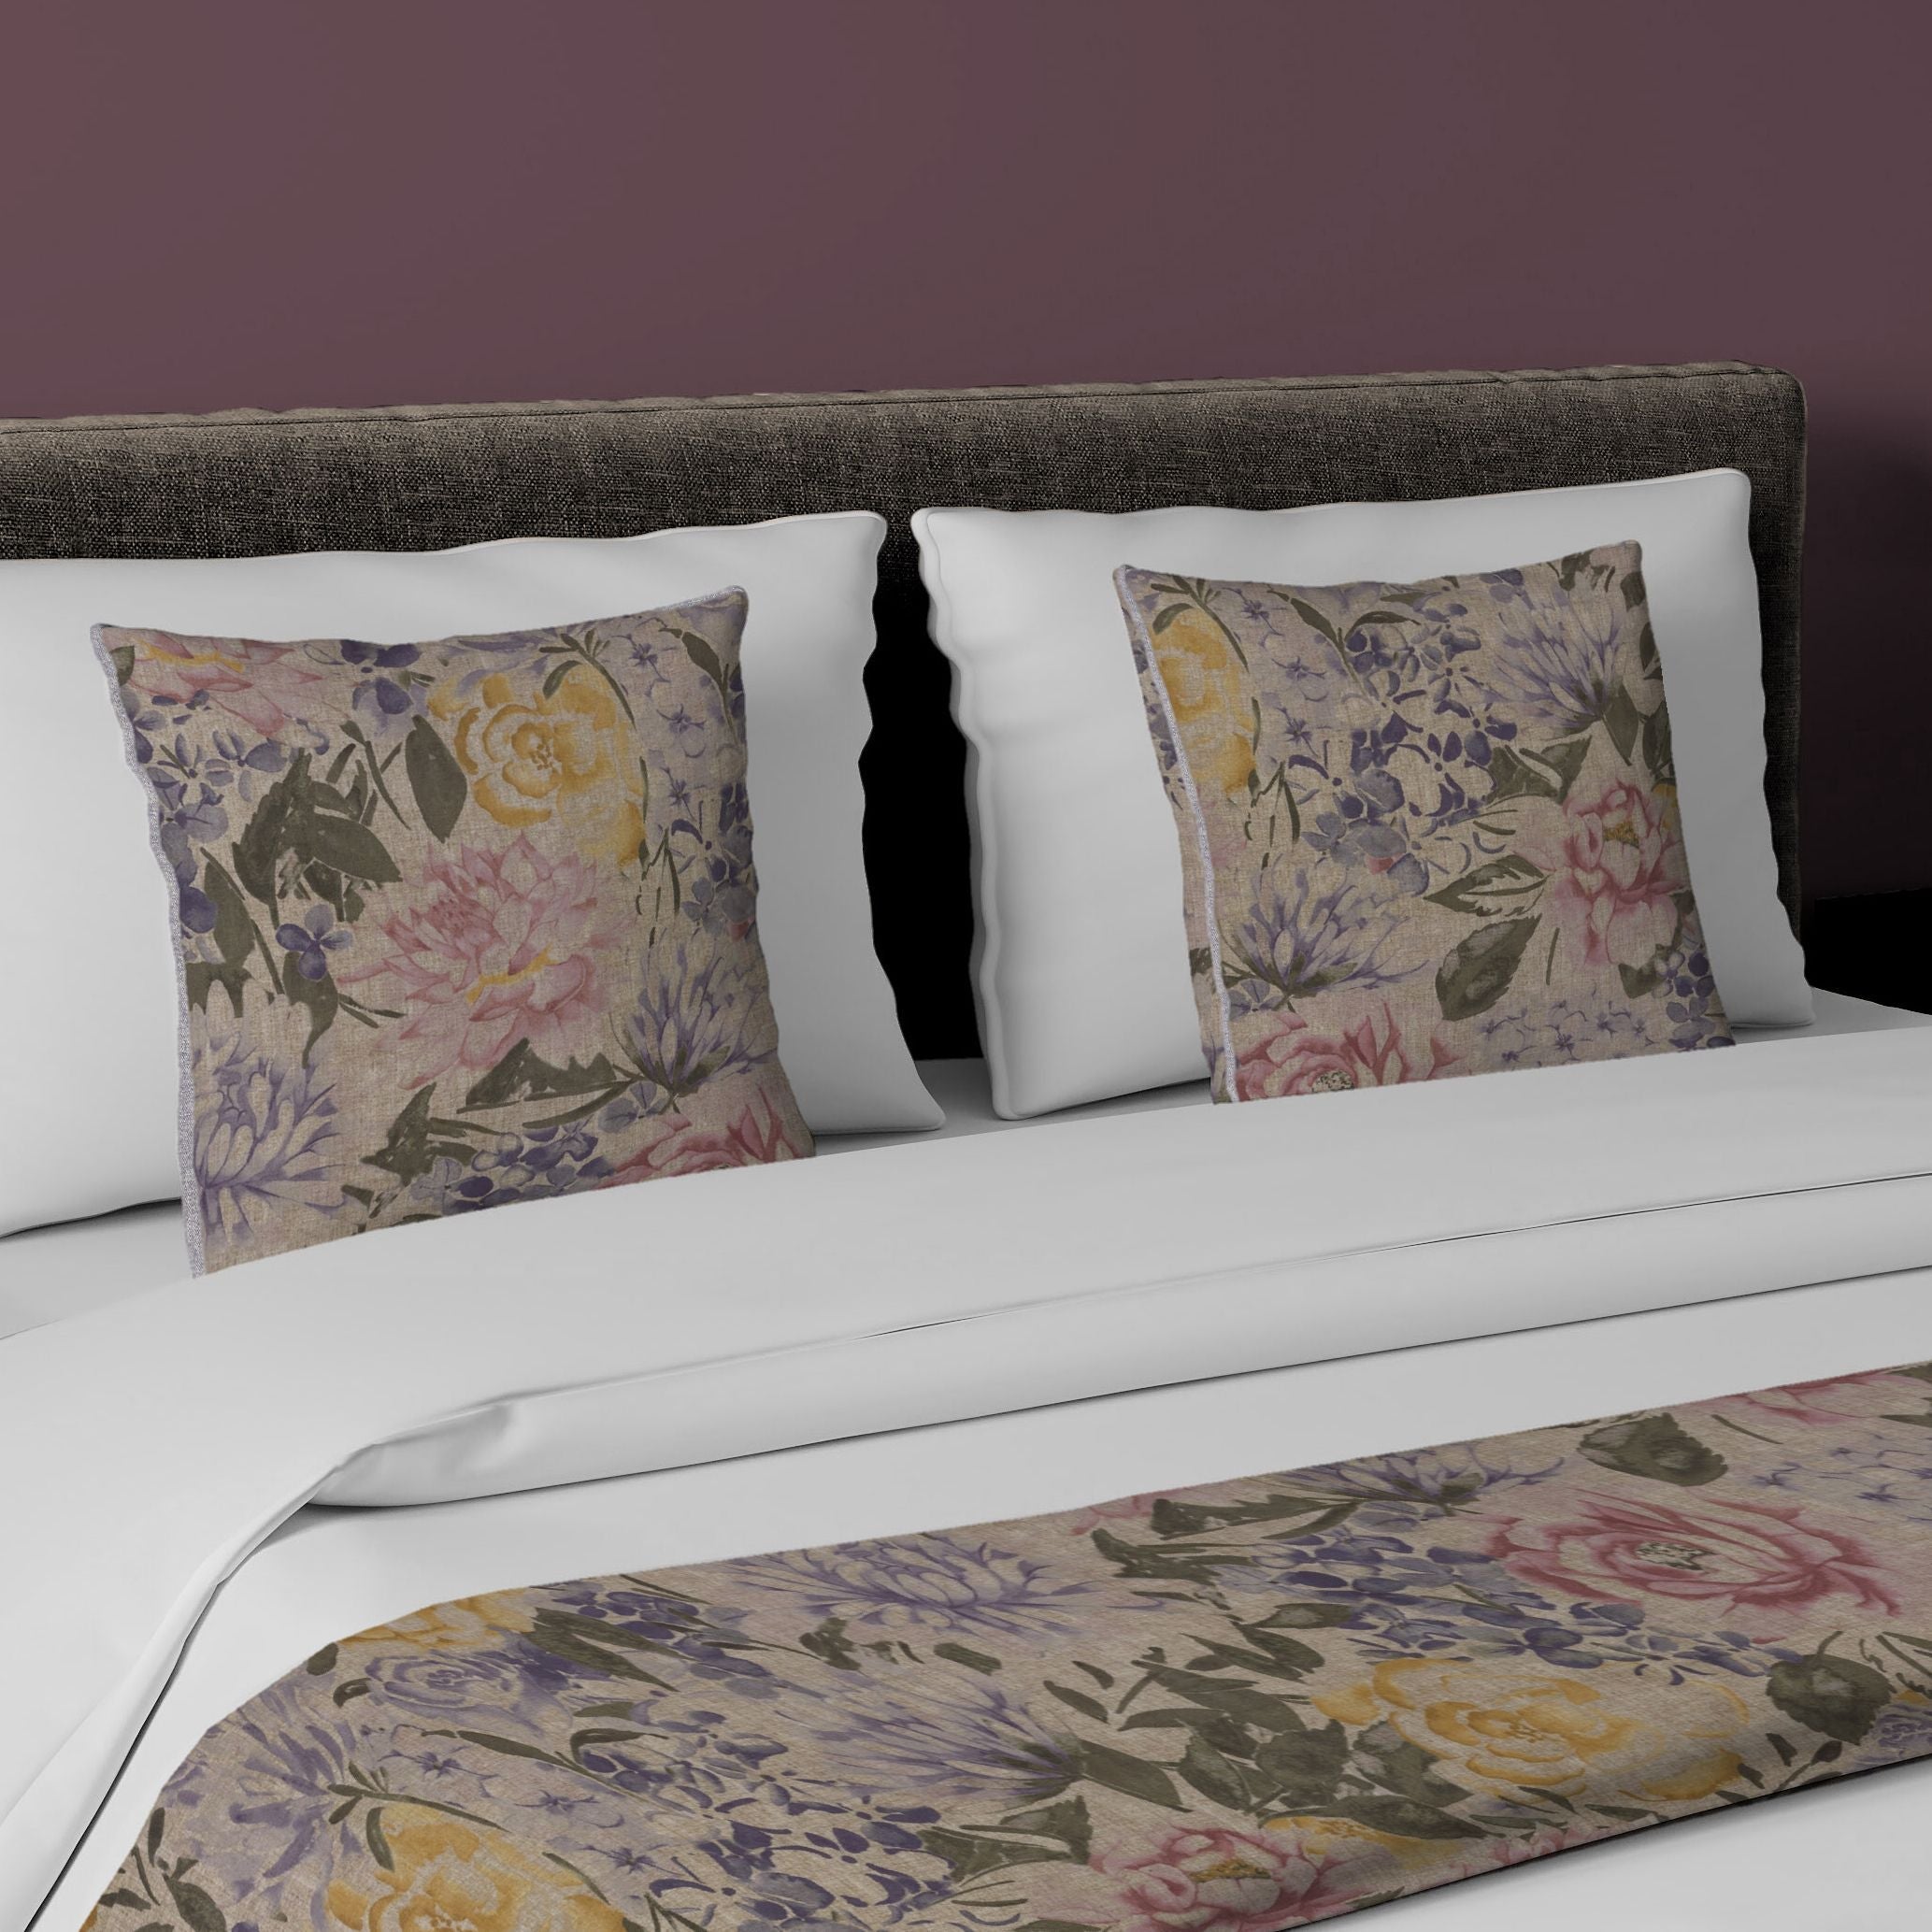 McAlister Textiles Blooma Purple, Pink and Ochre Floral Bedding Set Bedding Set Runner (50x240cm) + 2x Cushion Covers 